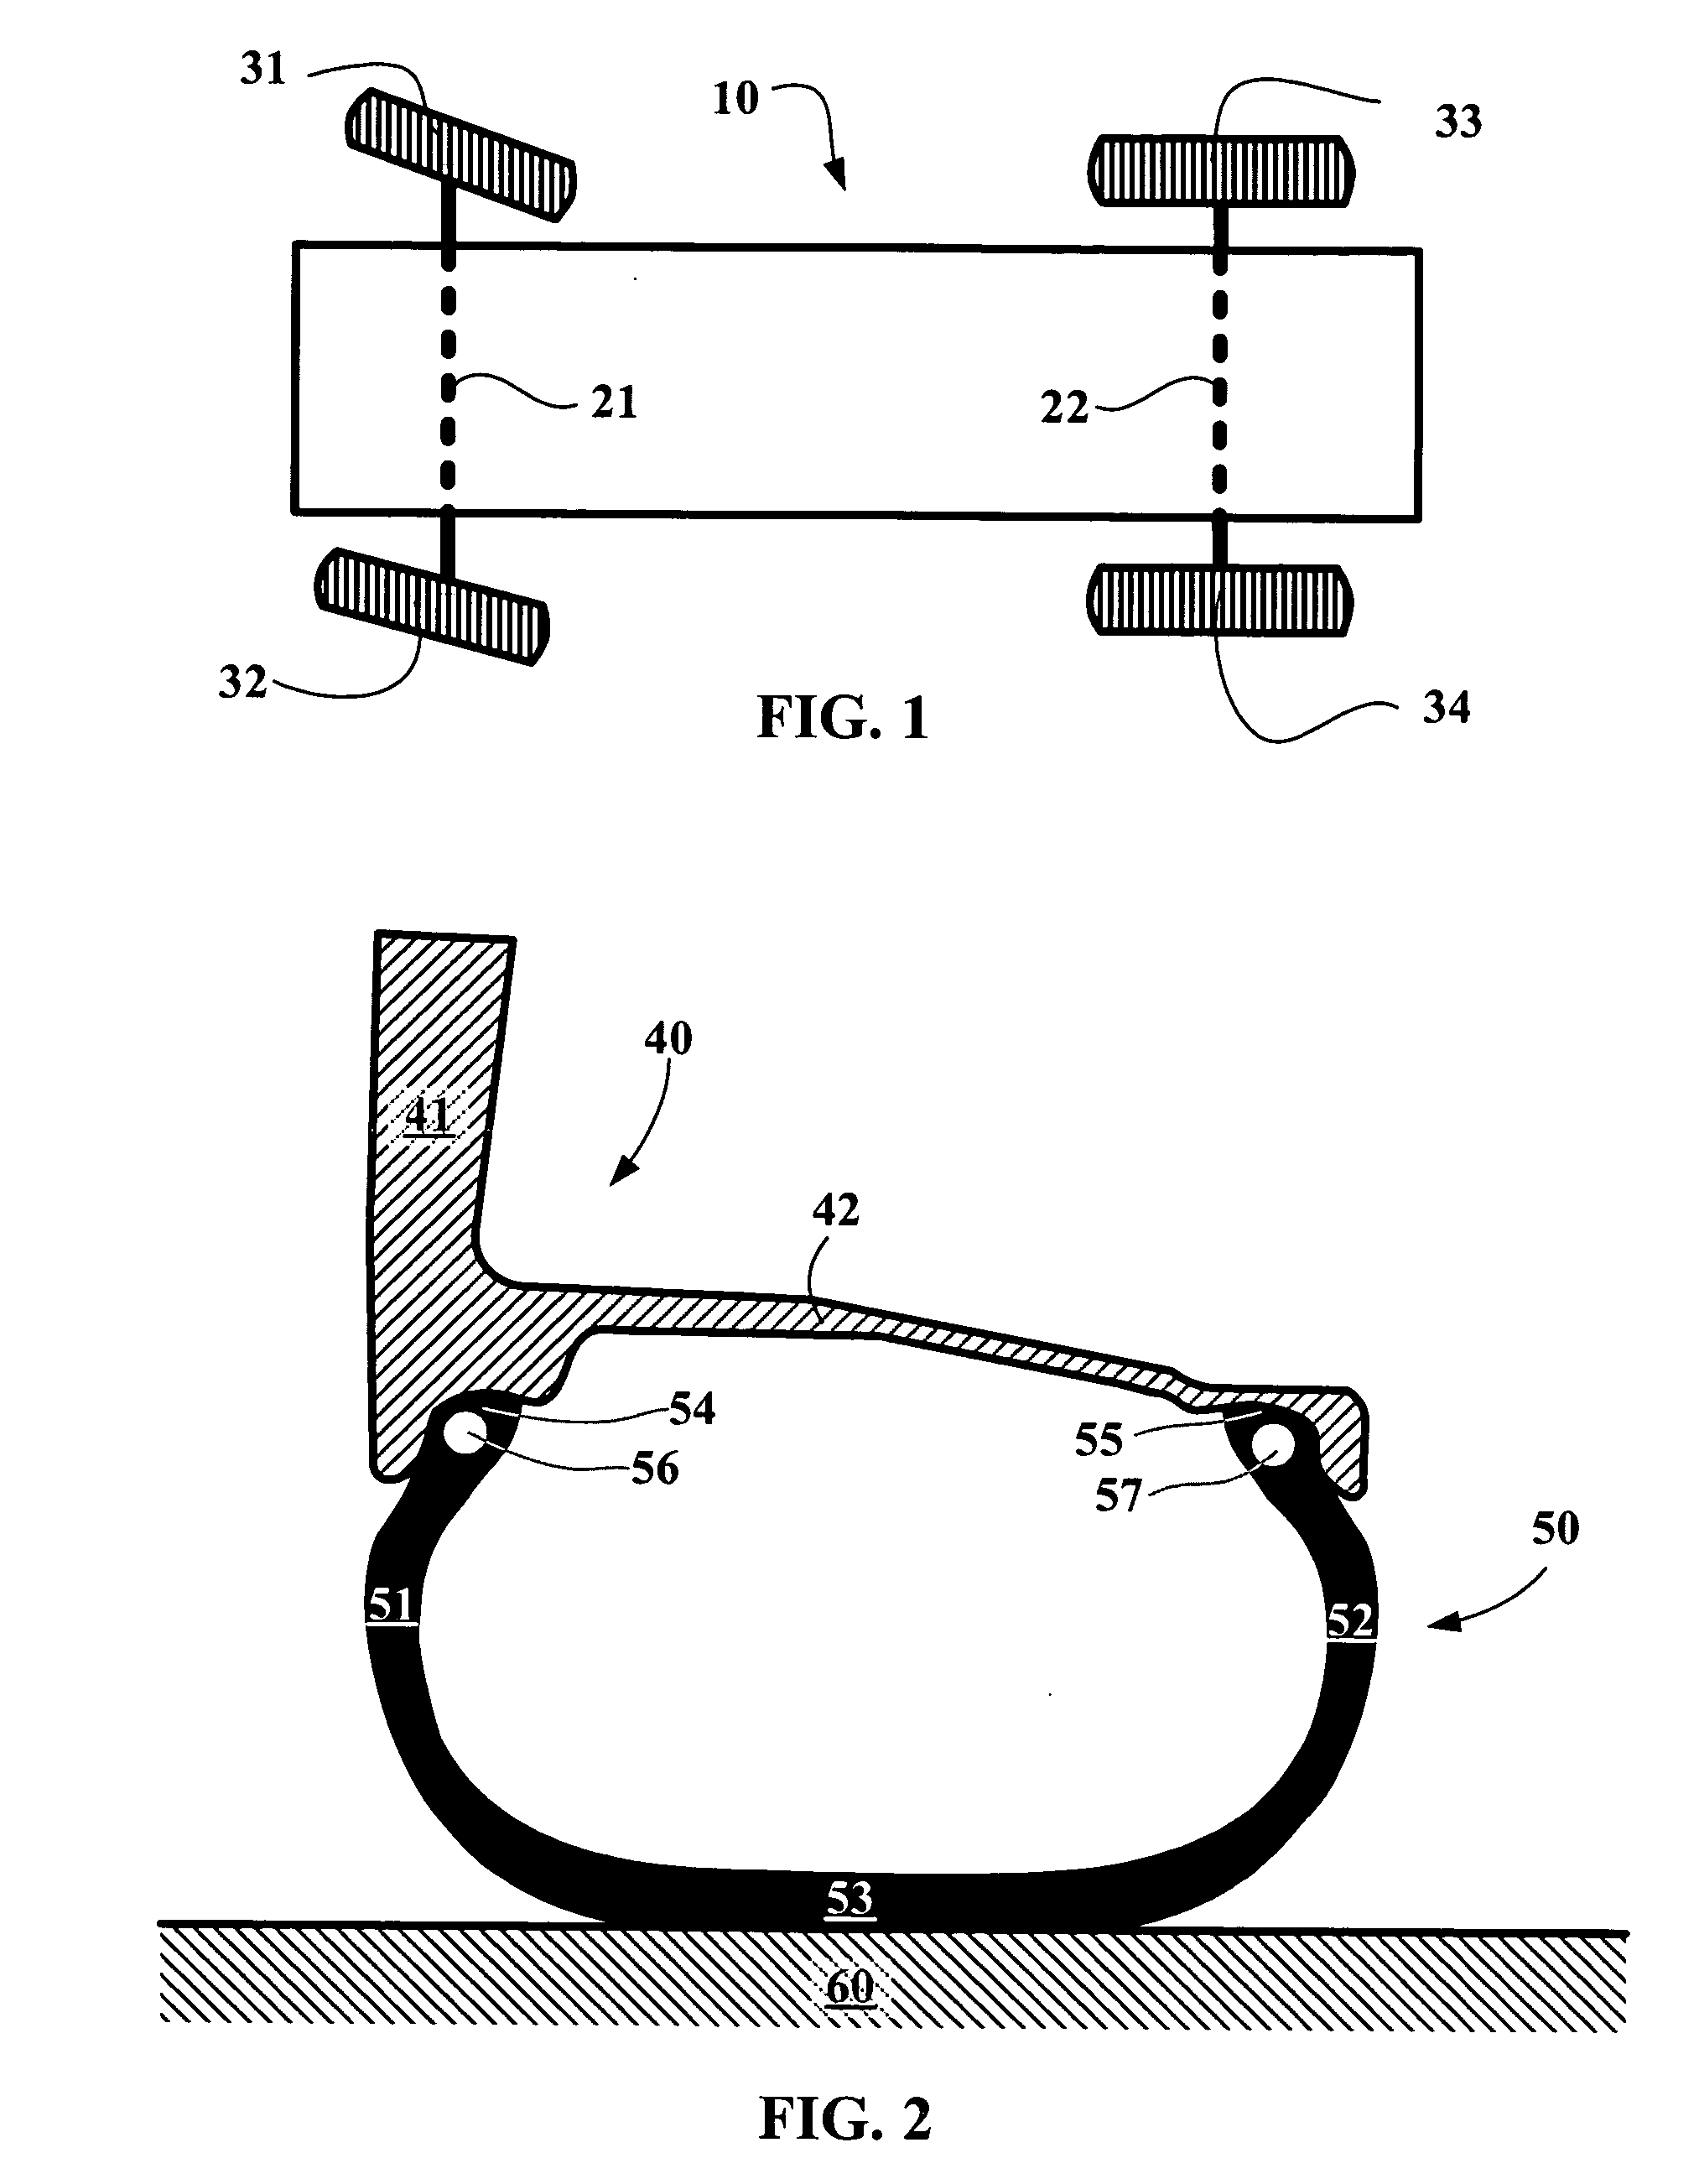 Method of unseating a tire